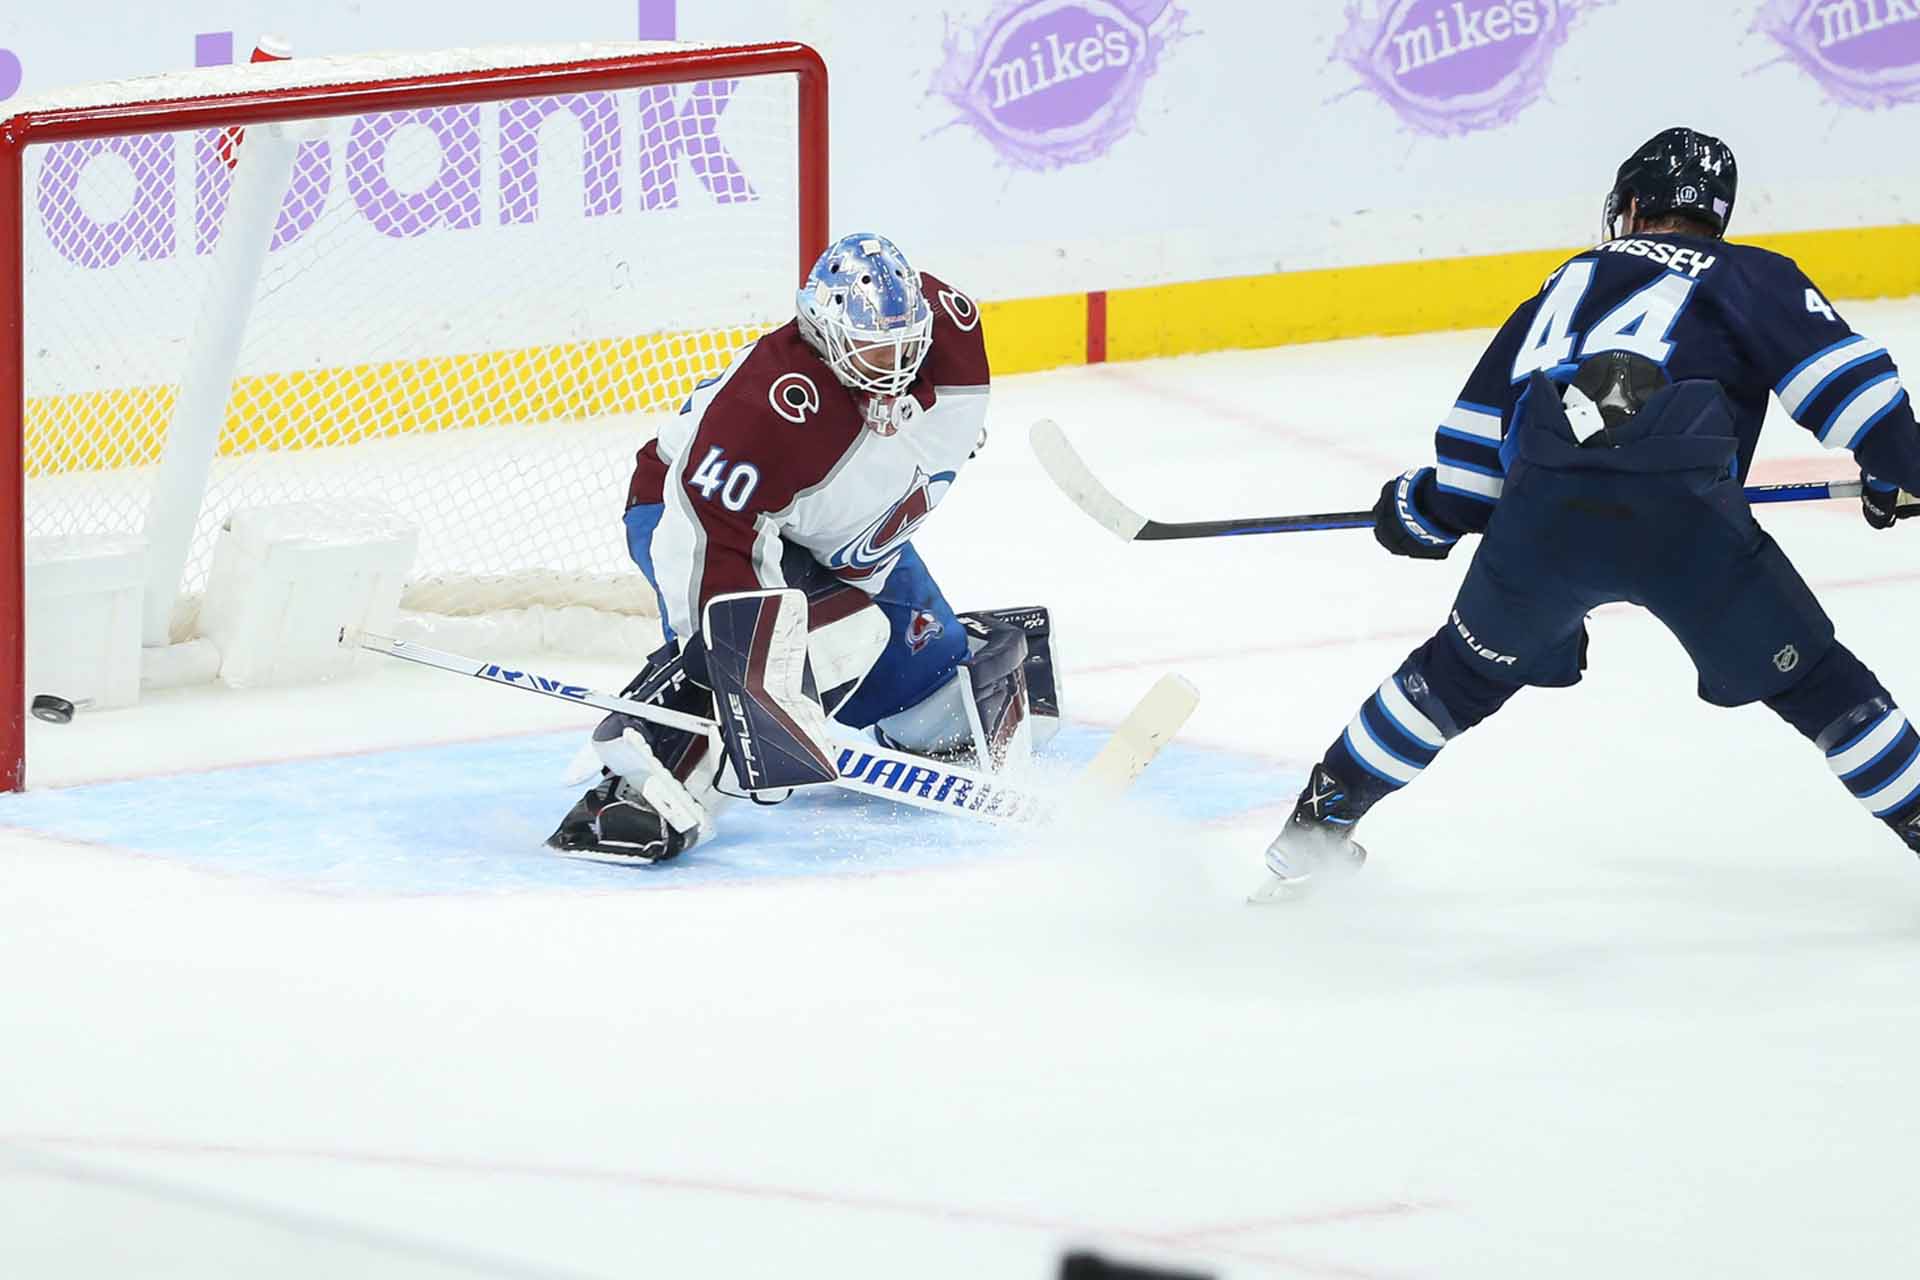 Colorado Avalanche vs Winnipeg Jets 2/24/23 NHL Tips, Bets and Analysis